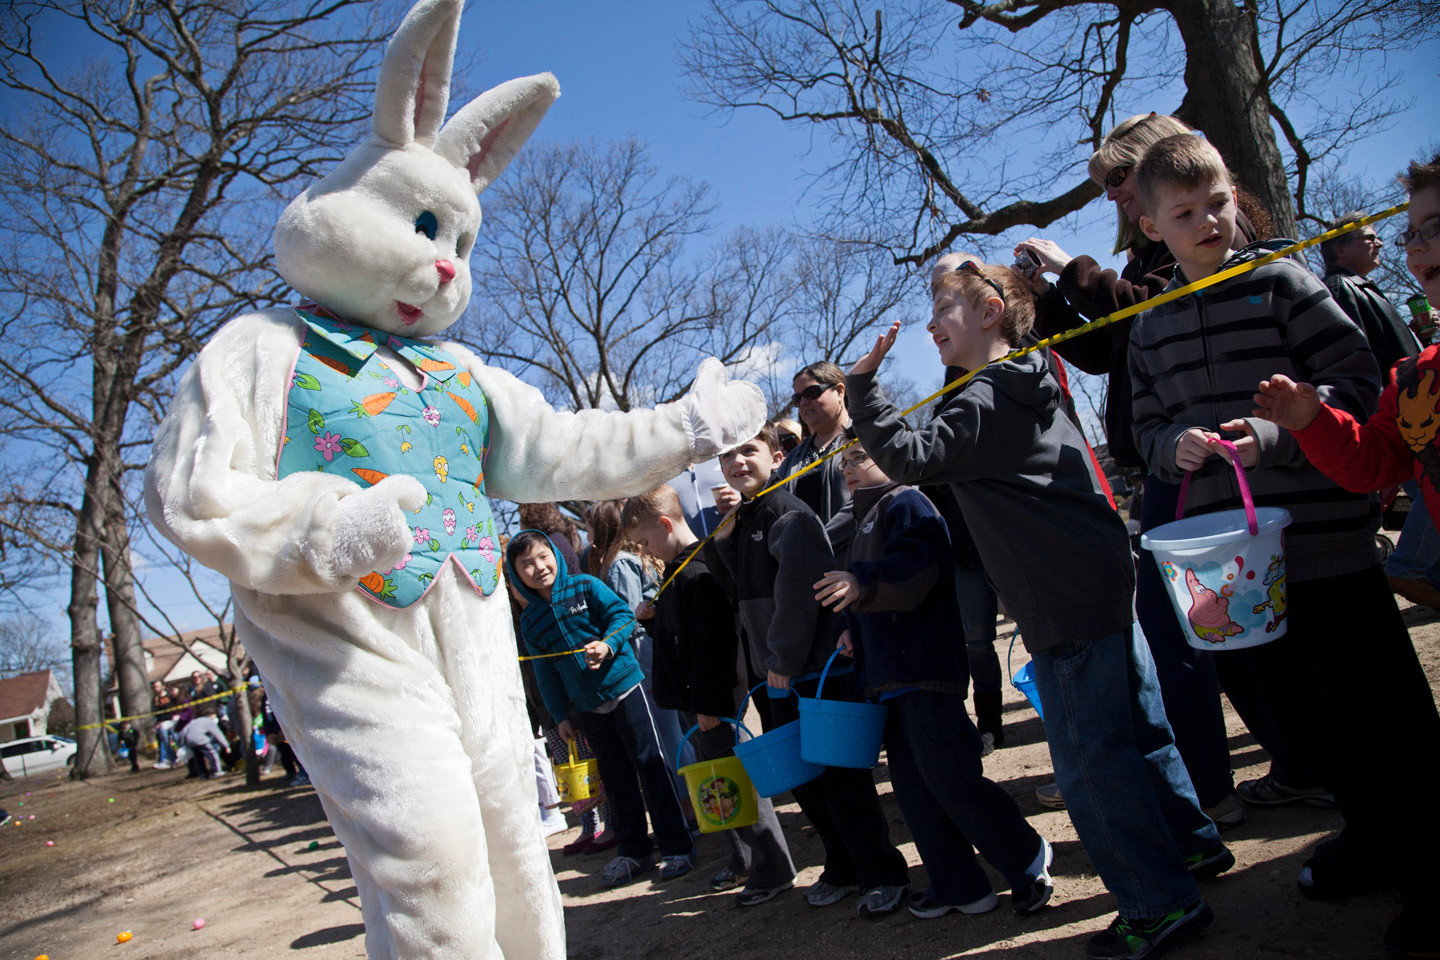 THE EASTER BUNNY made an appearance at the Easter Egg Hunt in East Rockaway.